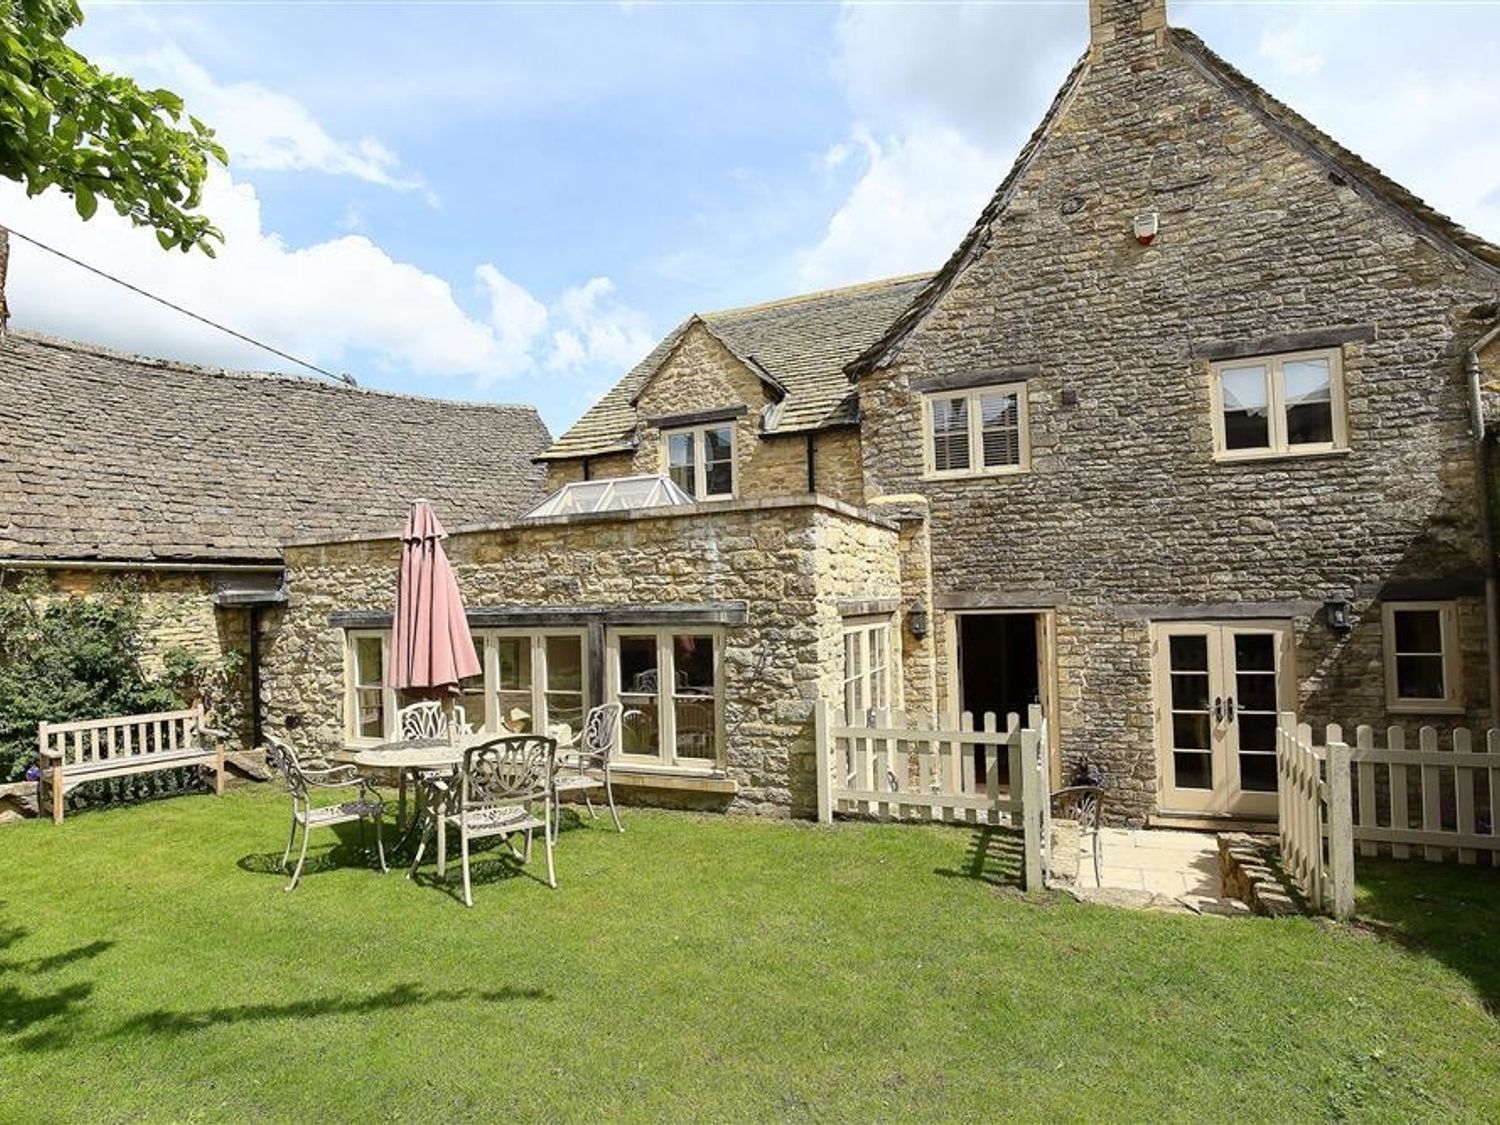 Coach House Burford - Cotswolds - 988655 - photo 1